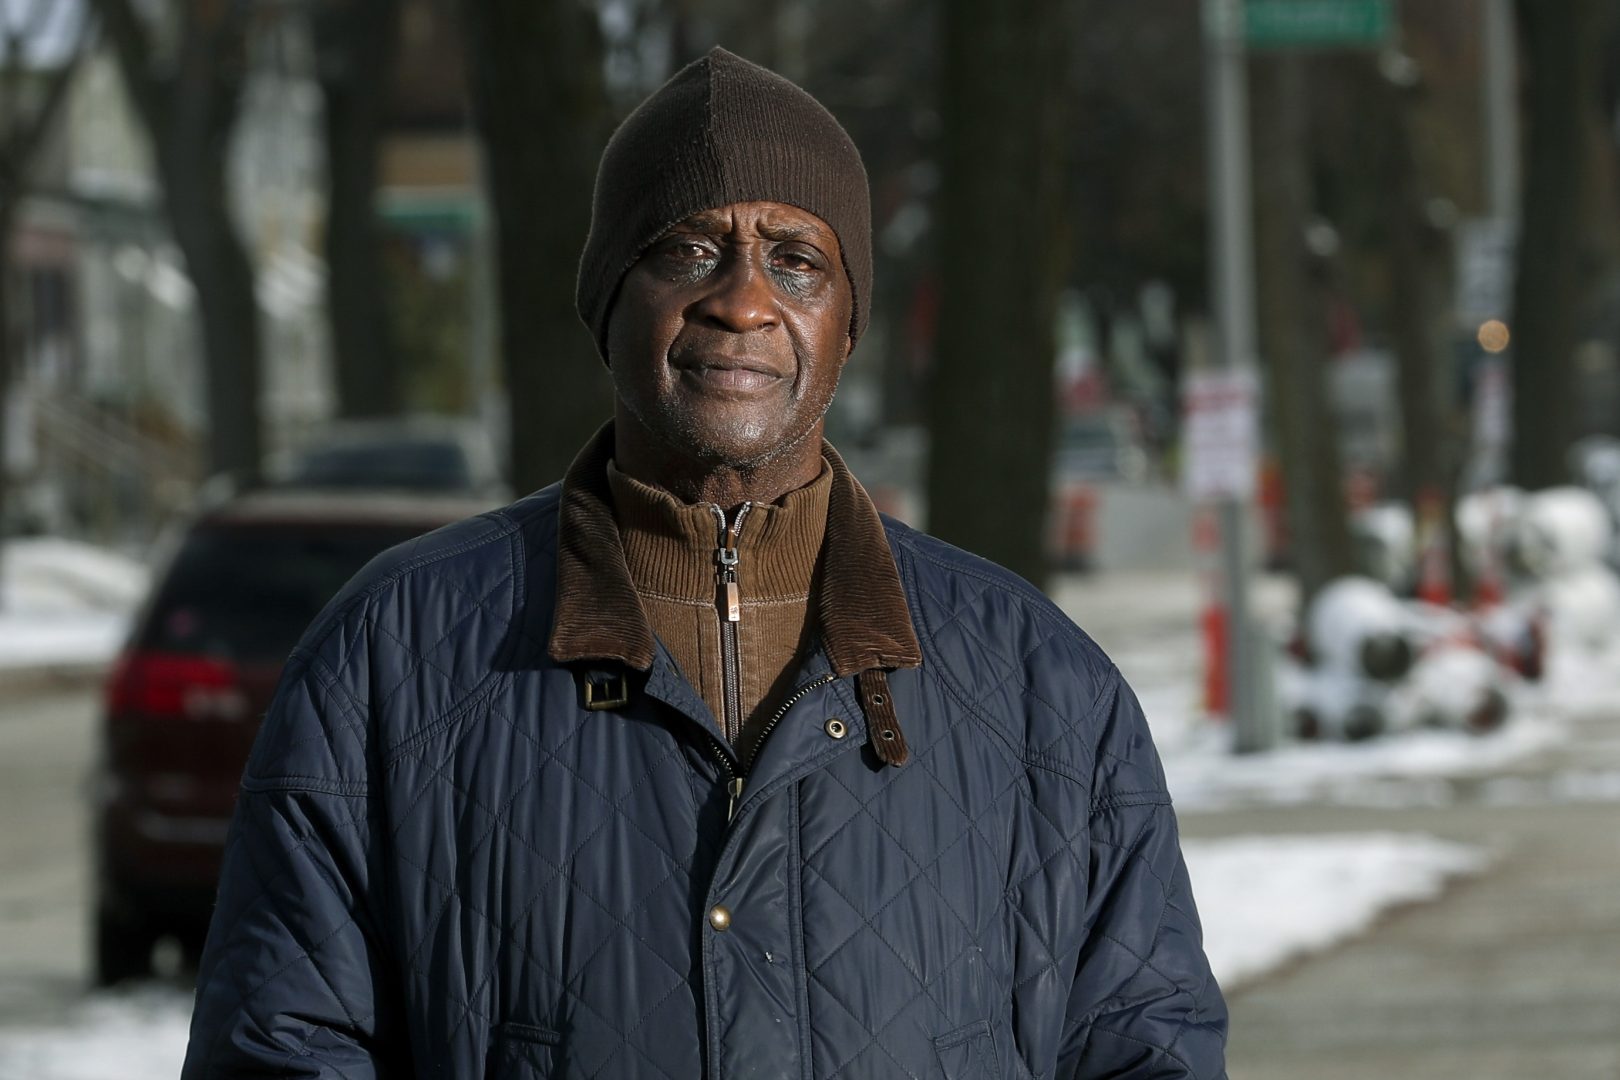 In this Thursday, Nov. 14, 2019 photo, Jerome Dillard poses in Milwaukee. Dillard, a former inmate who is now the state director of Milwaukee-based advocacy group Ex-incarcerated People Organizing, supports ending prison gerrymandering. A longstanding U.S. Census Bureau policy for counting inmates as prison residents means a significant portion of Milwaukee’s poorest neighborhoods will be undercounted because their incarceration rates are among the highest in the nation.